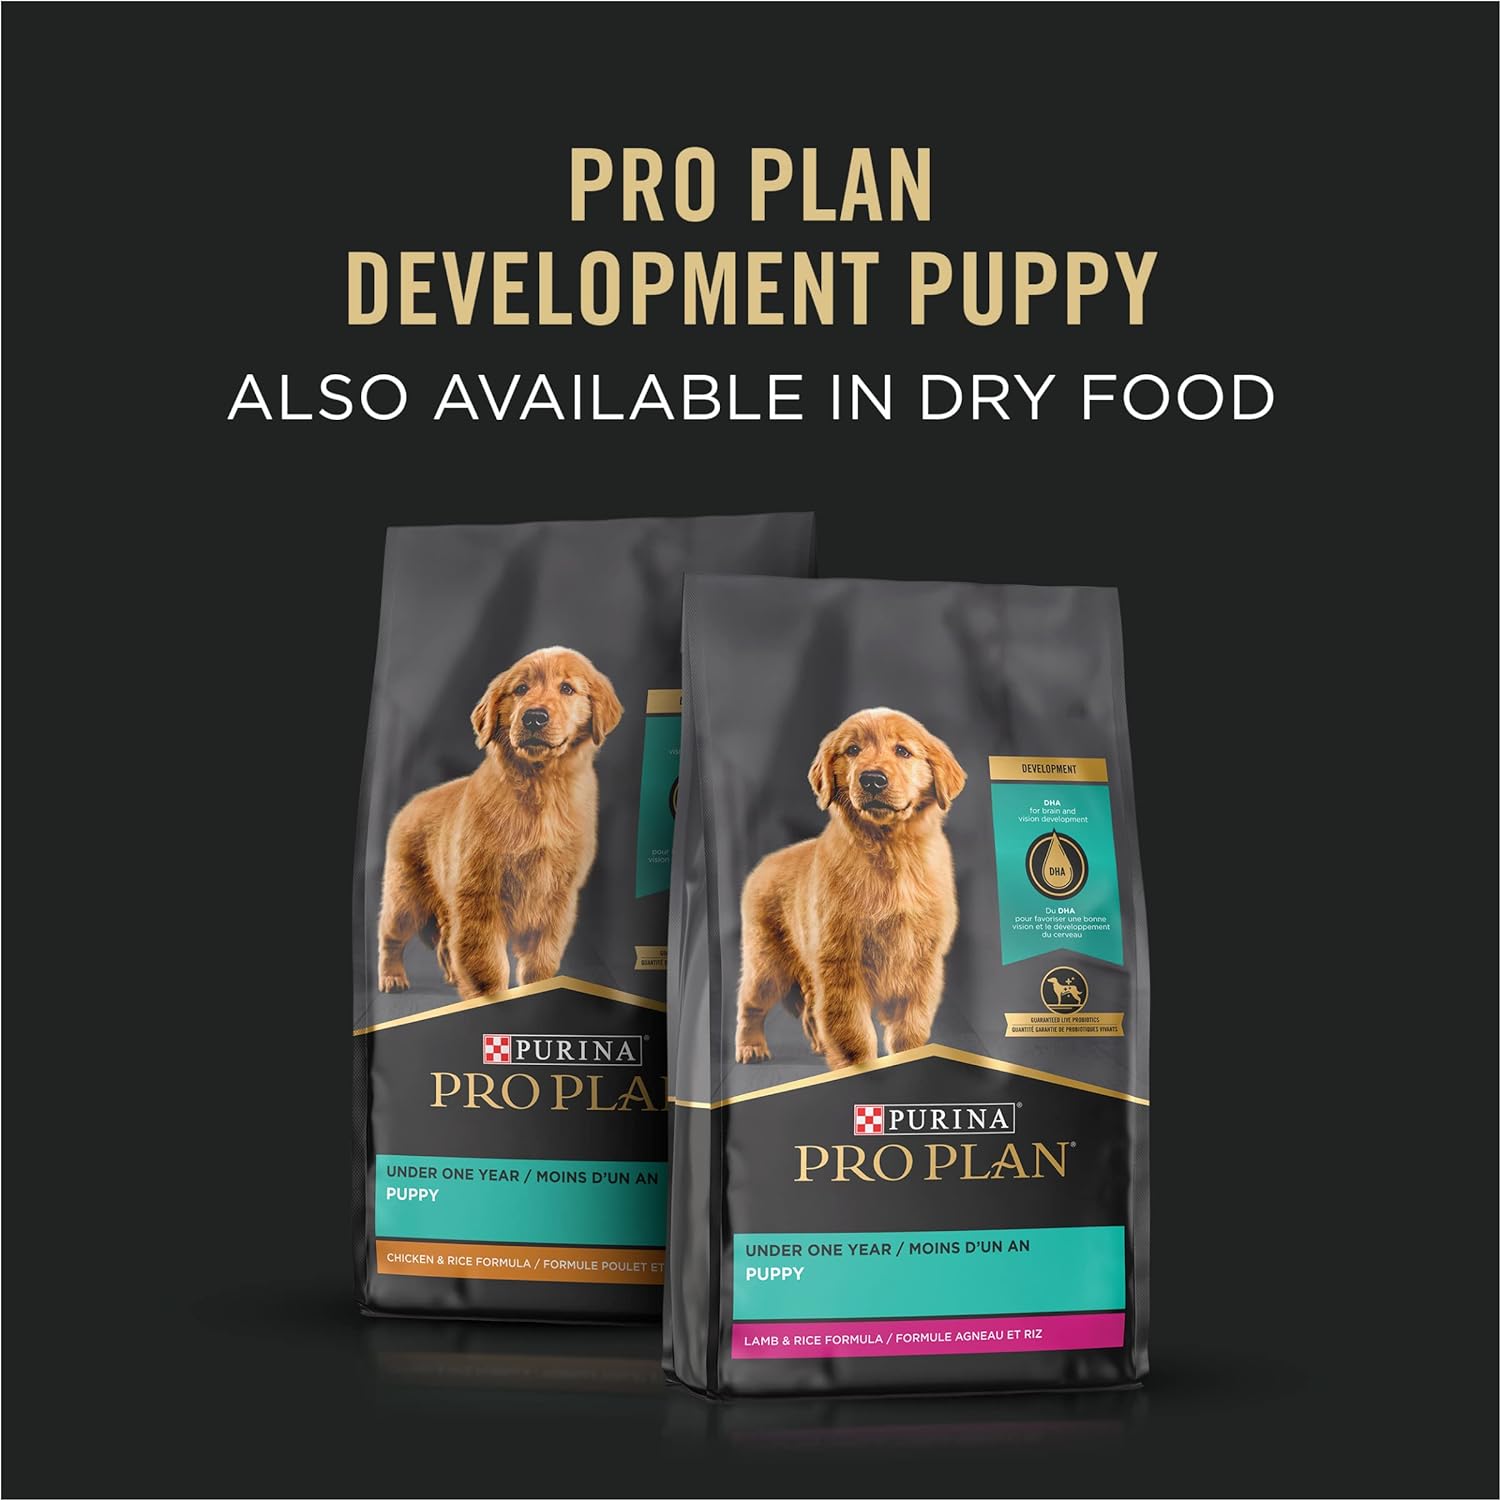 Wholesale prices with free shipping all over United States Purina Pro Plan Wet Dog Food for Small Dogs Chicken or Turkey Pate in Sauce High Protein Dog Food Variety Pack - (12) 3.5 oz. Trays - Steven Deals